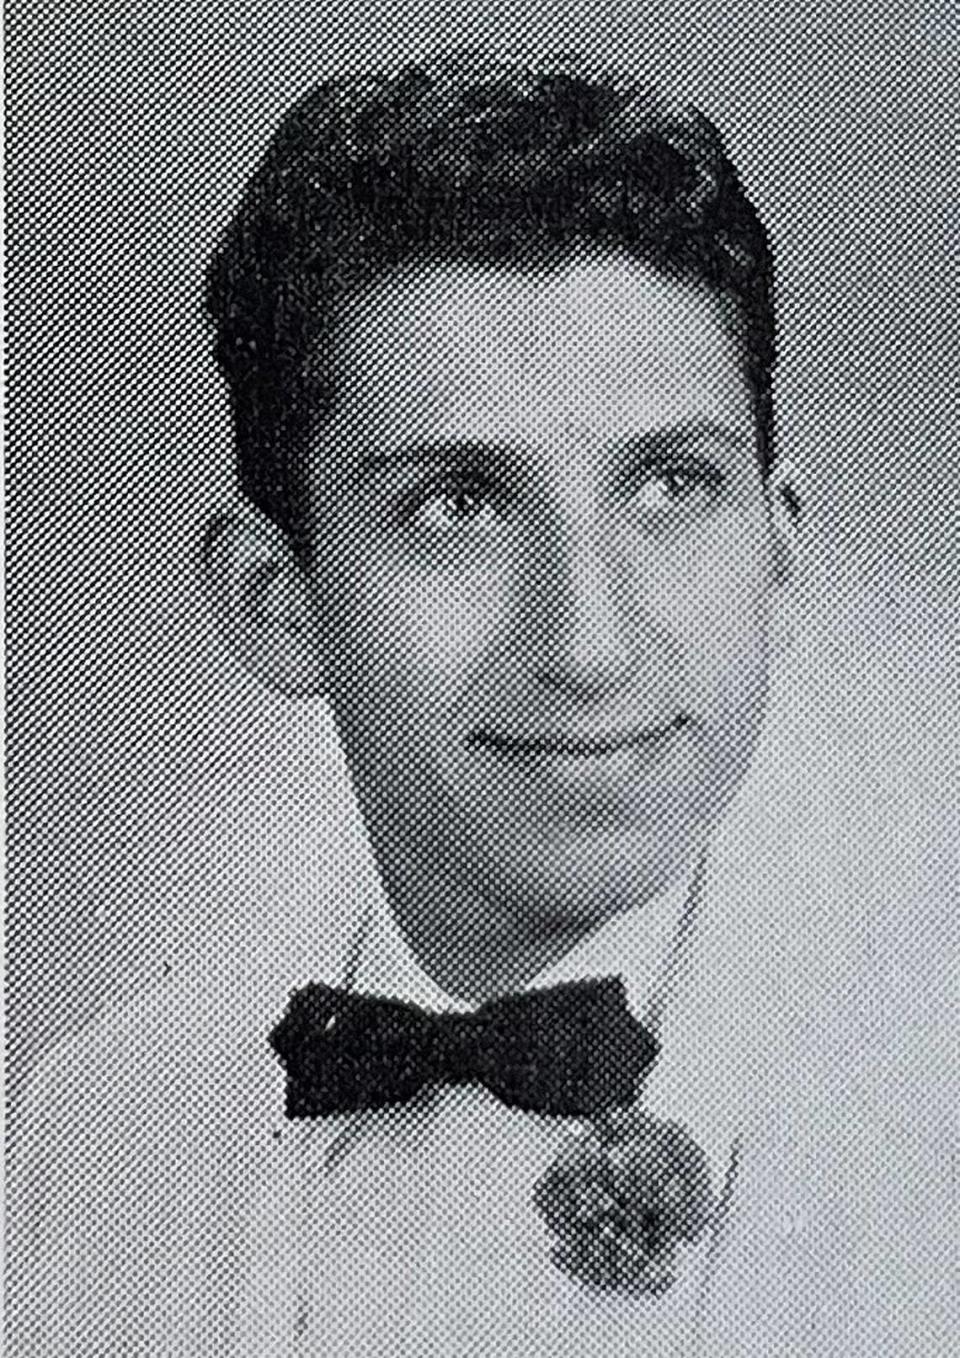 Harry Pila’s senior picture from Paschal High School’s 1959 yearbook.